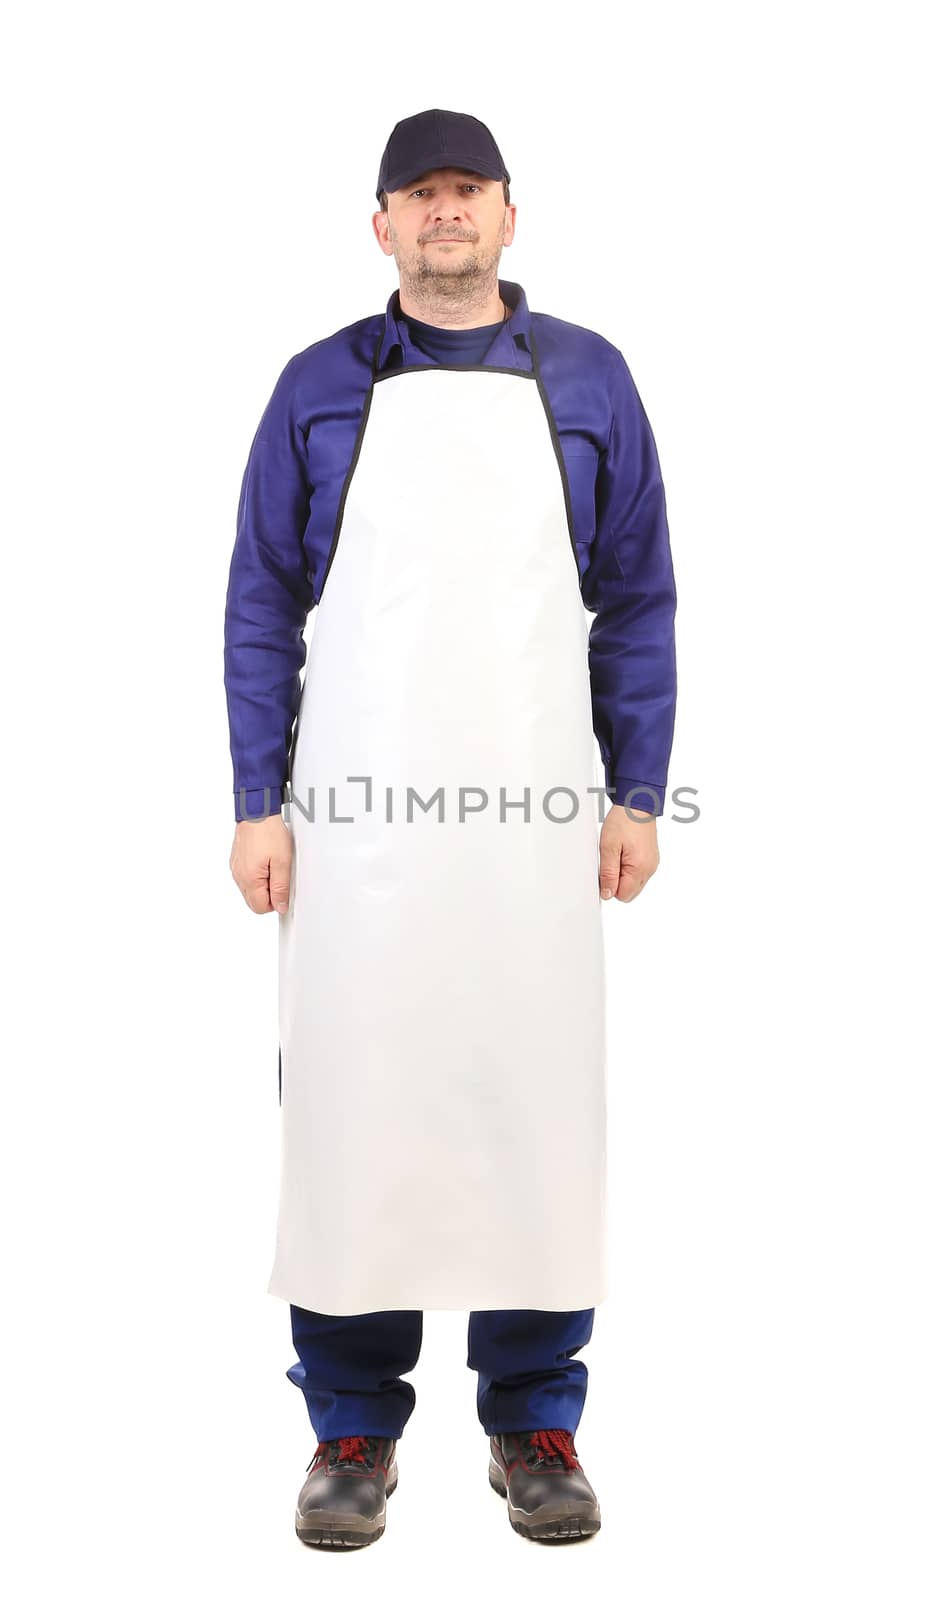 Worker wearing blue apron. by indigolotos